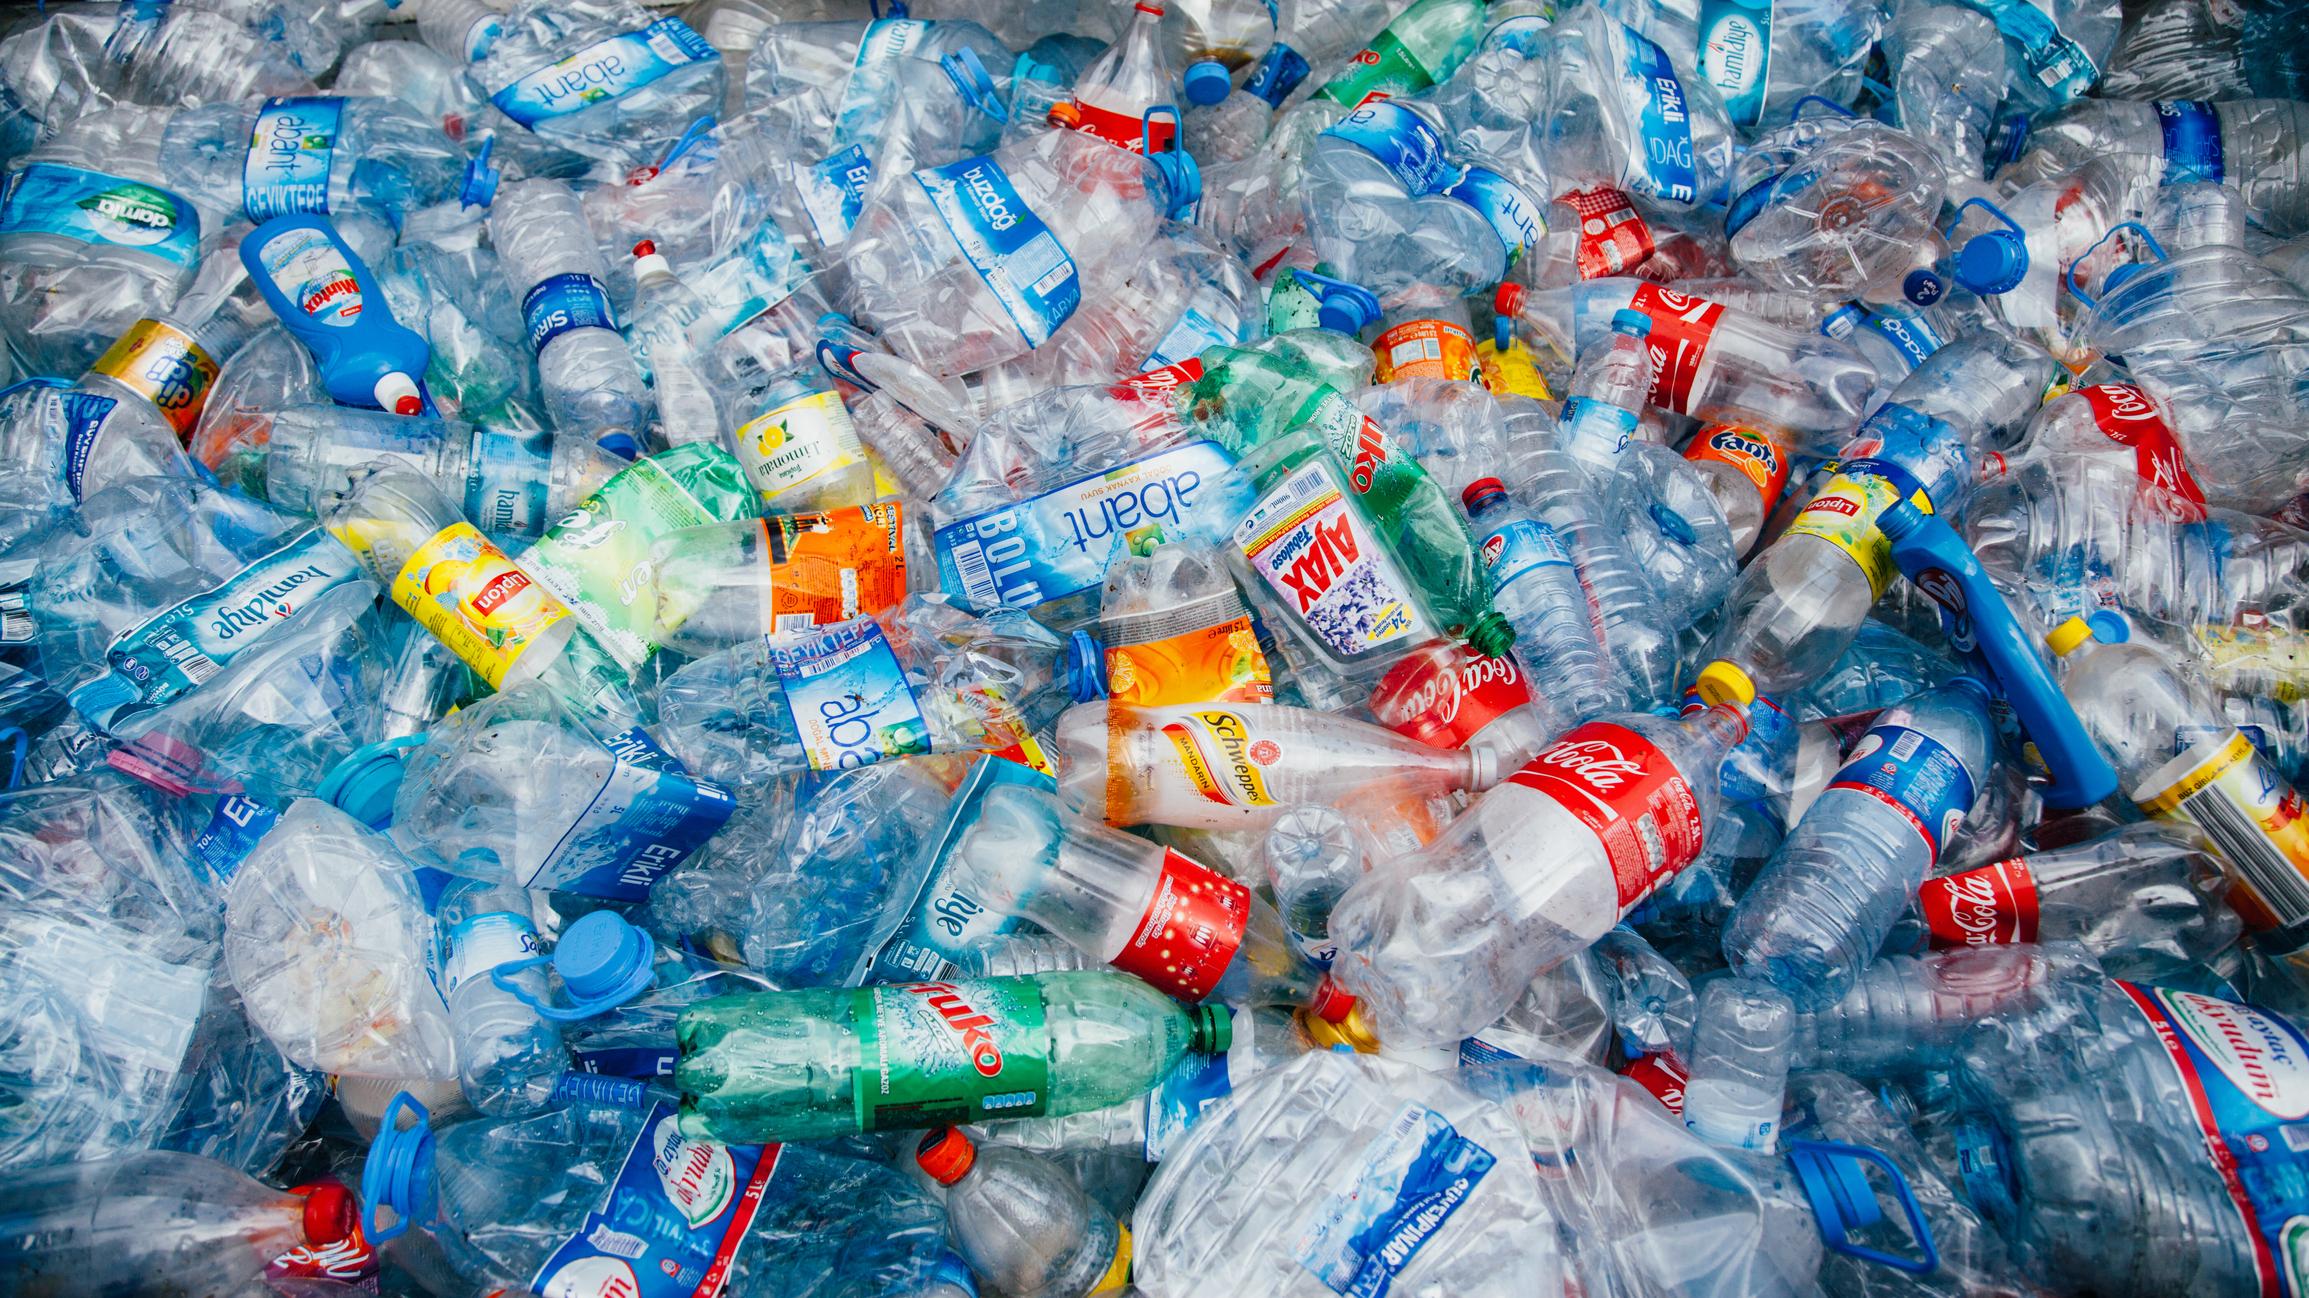 Plastic waste could be turned into hydrogen for fueling cars